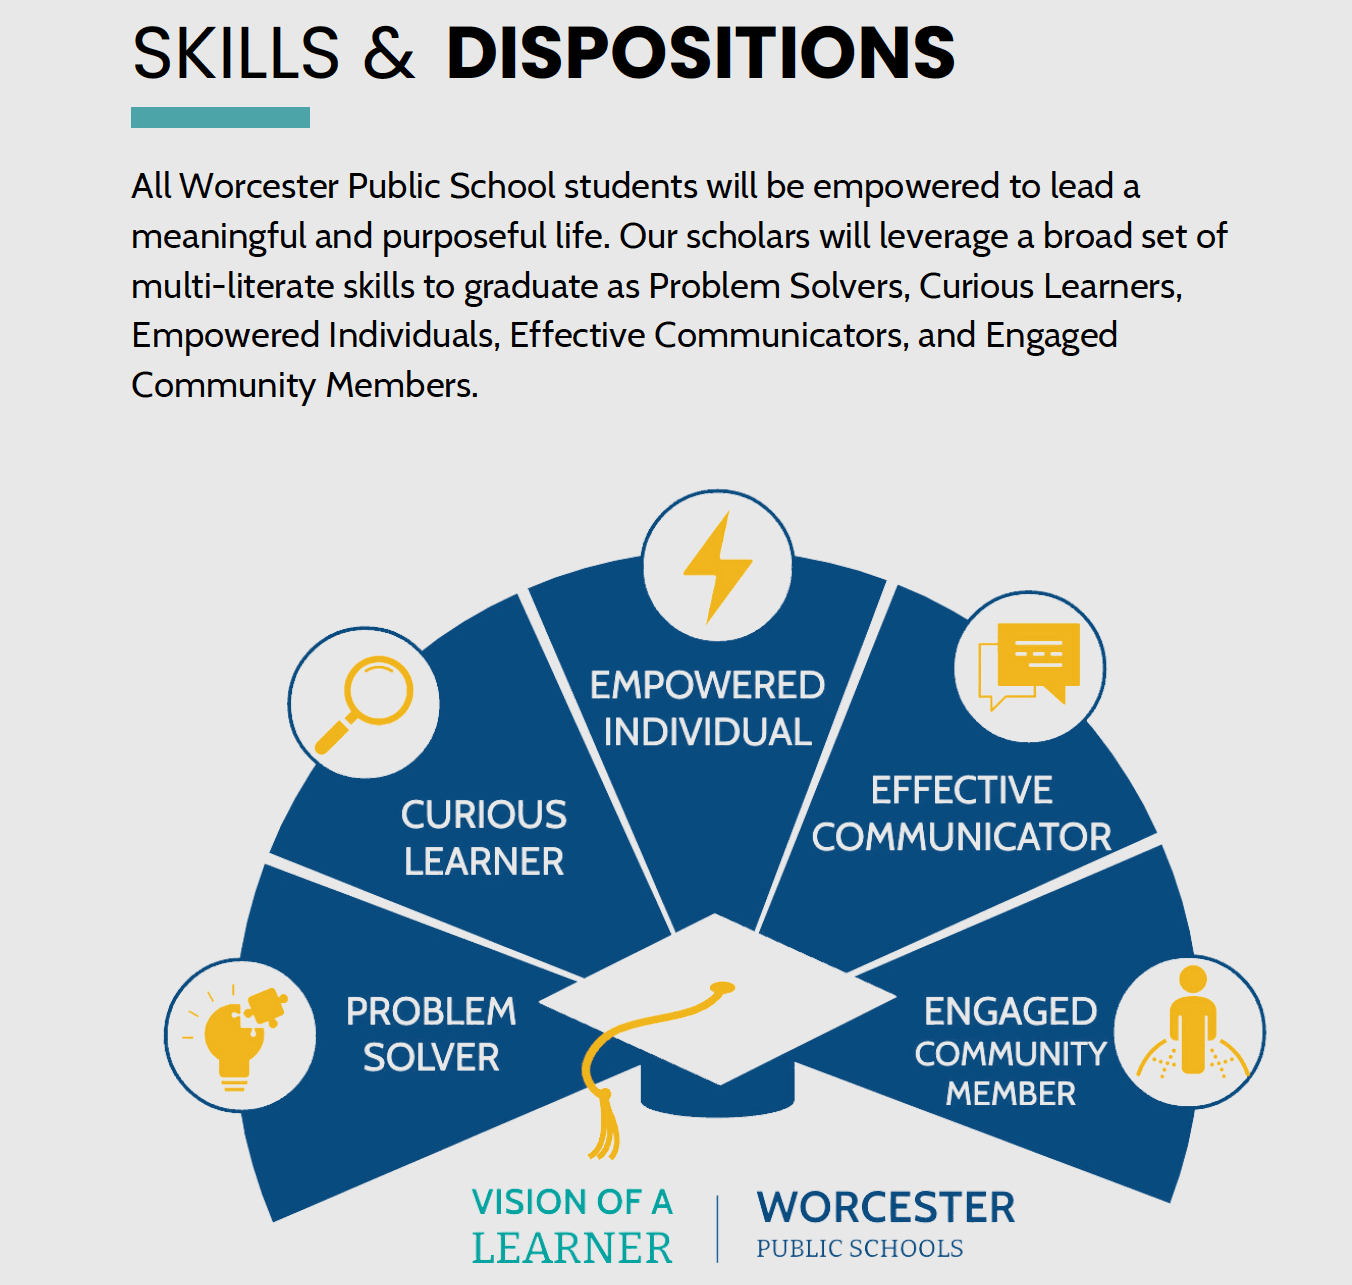 An image of text that outlines the Vision of a Learner skills and dispositions, which are also contained in a readable format on this web page.